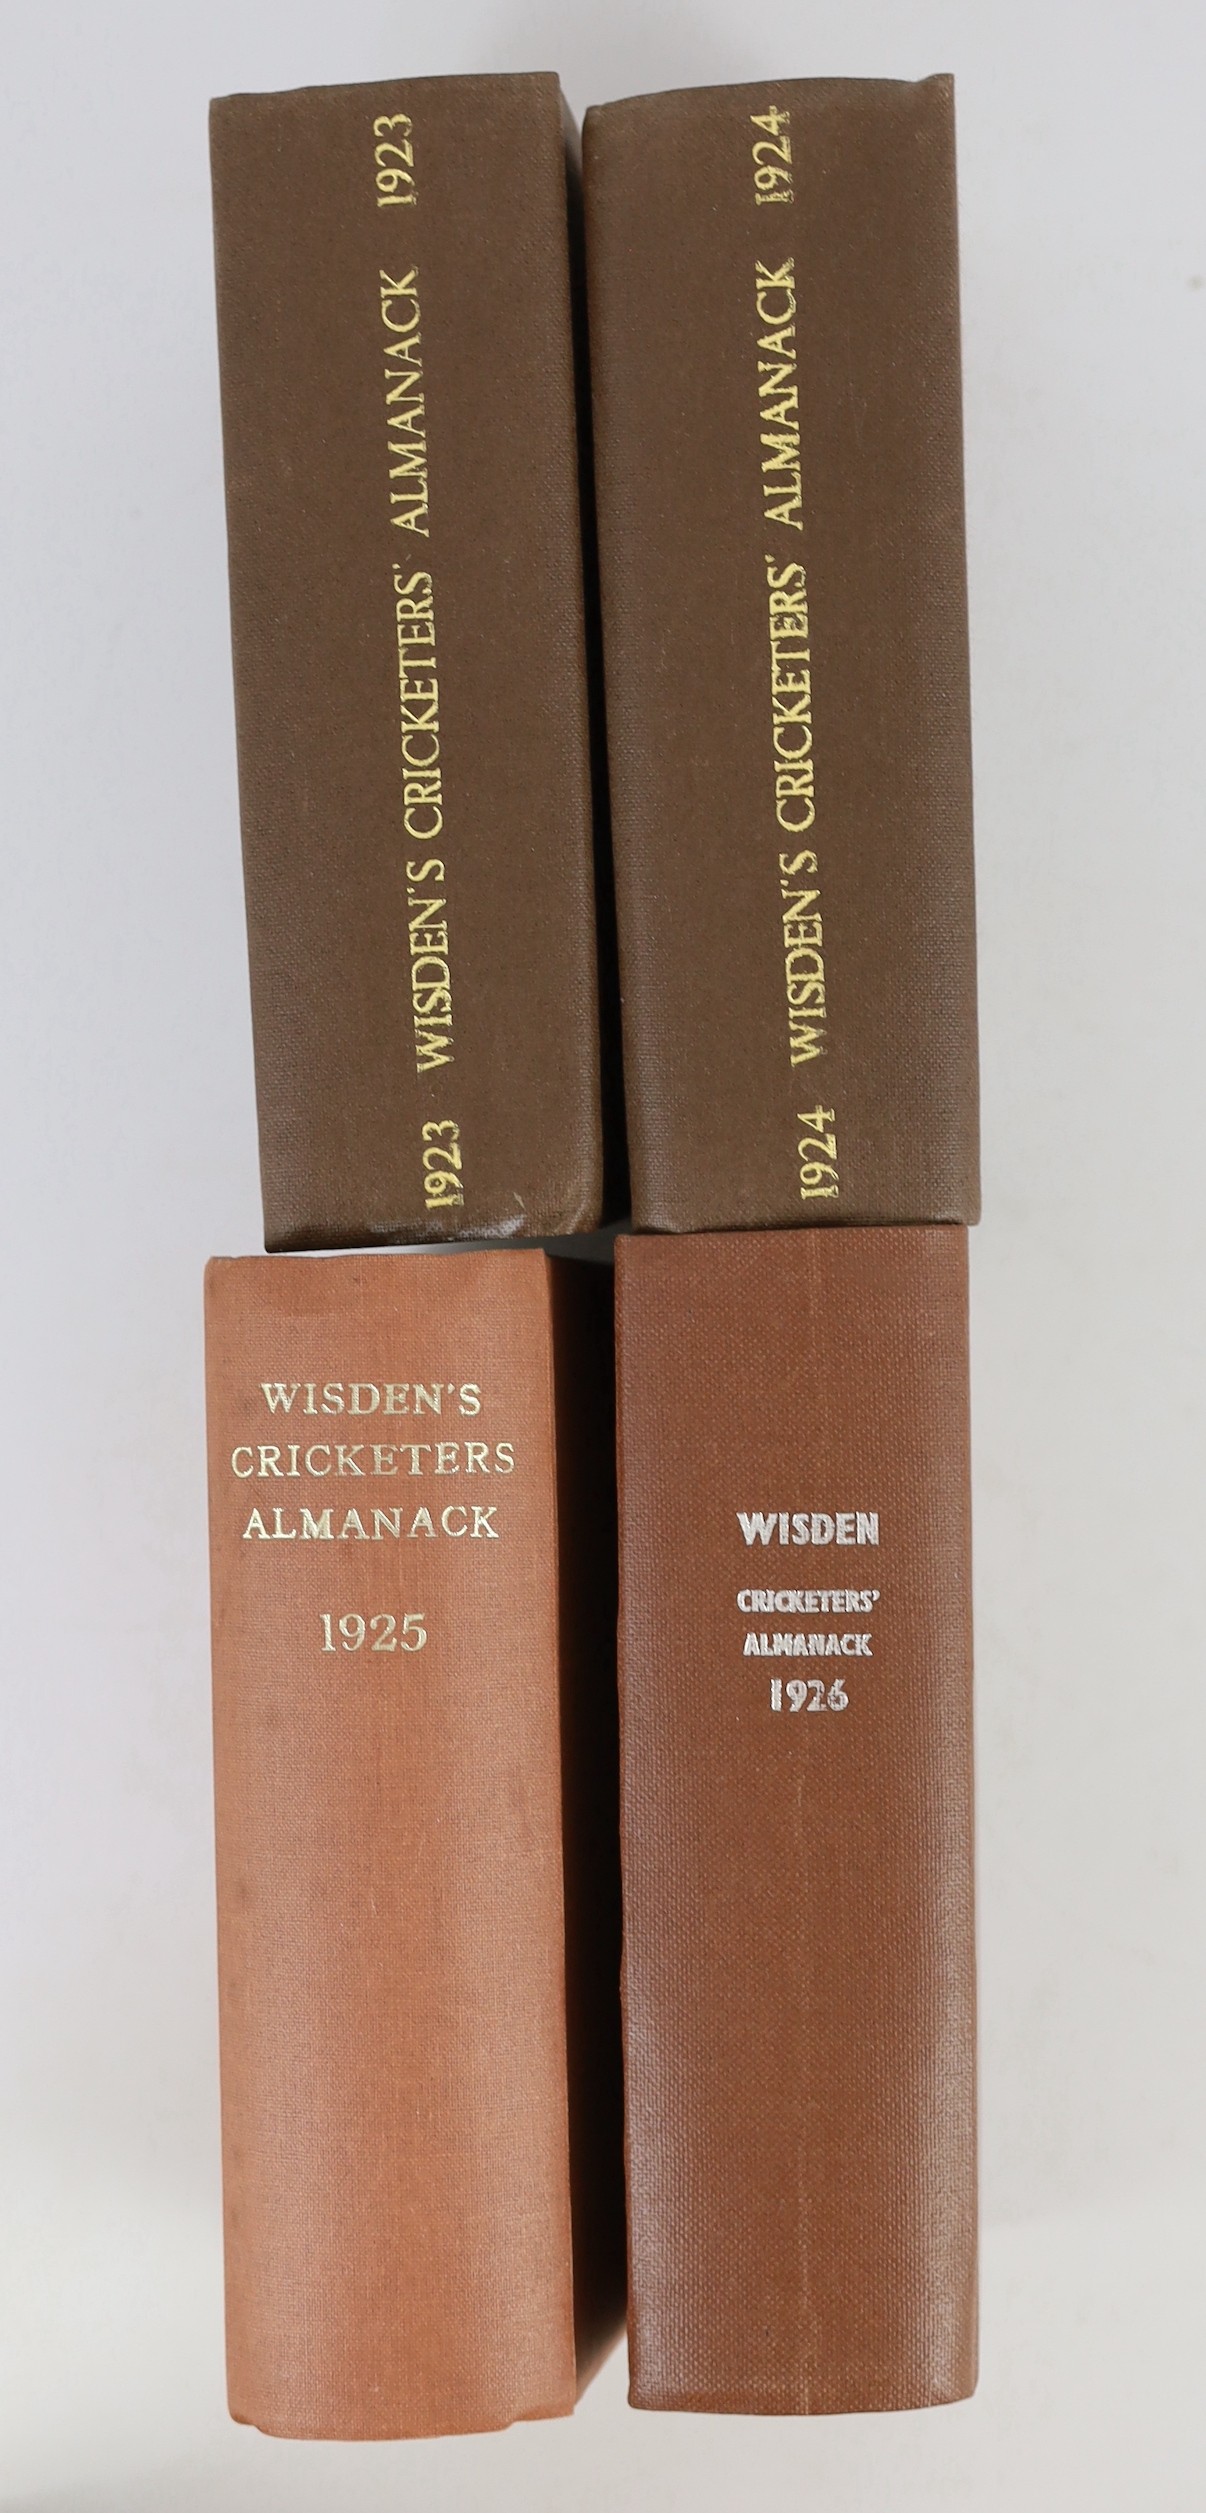 Wisden, John - Cricketers’ Almanack for the years 1919 (56th edition) - 1929 (66th edition), all rebound brown cloth gilt, and retaining original paper wrappers, bar issues of 1920-21, which lack wrappers and early adver